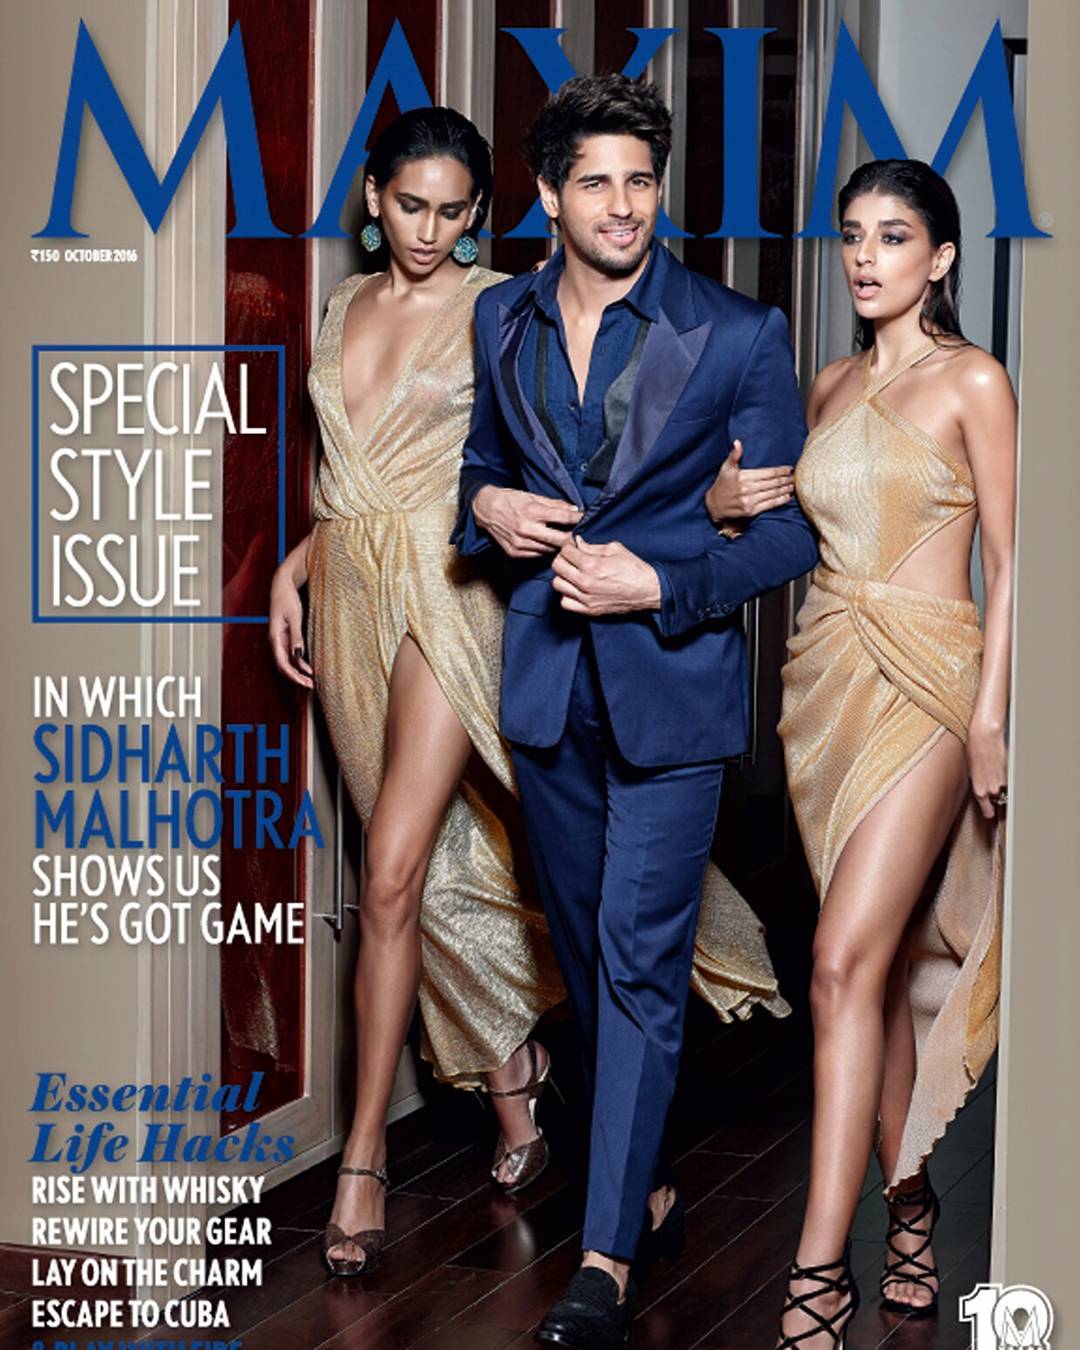 Styled in the sartorial, shimmering ensemble by The Arvind Store, Siddharth
Malhotra sure knows how to set the stage ablazed on the Maxim cover.

#TheArvindStore #siddharthMalhotra #maxim #DapperLook #FormalLook #MeninStyle #FashionForMen